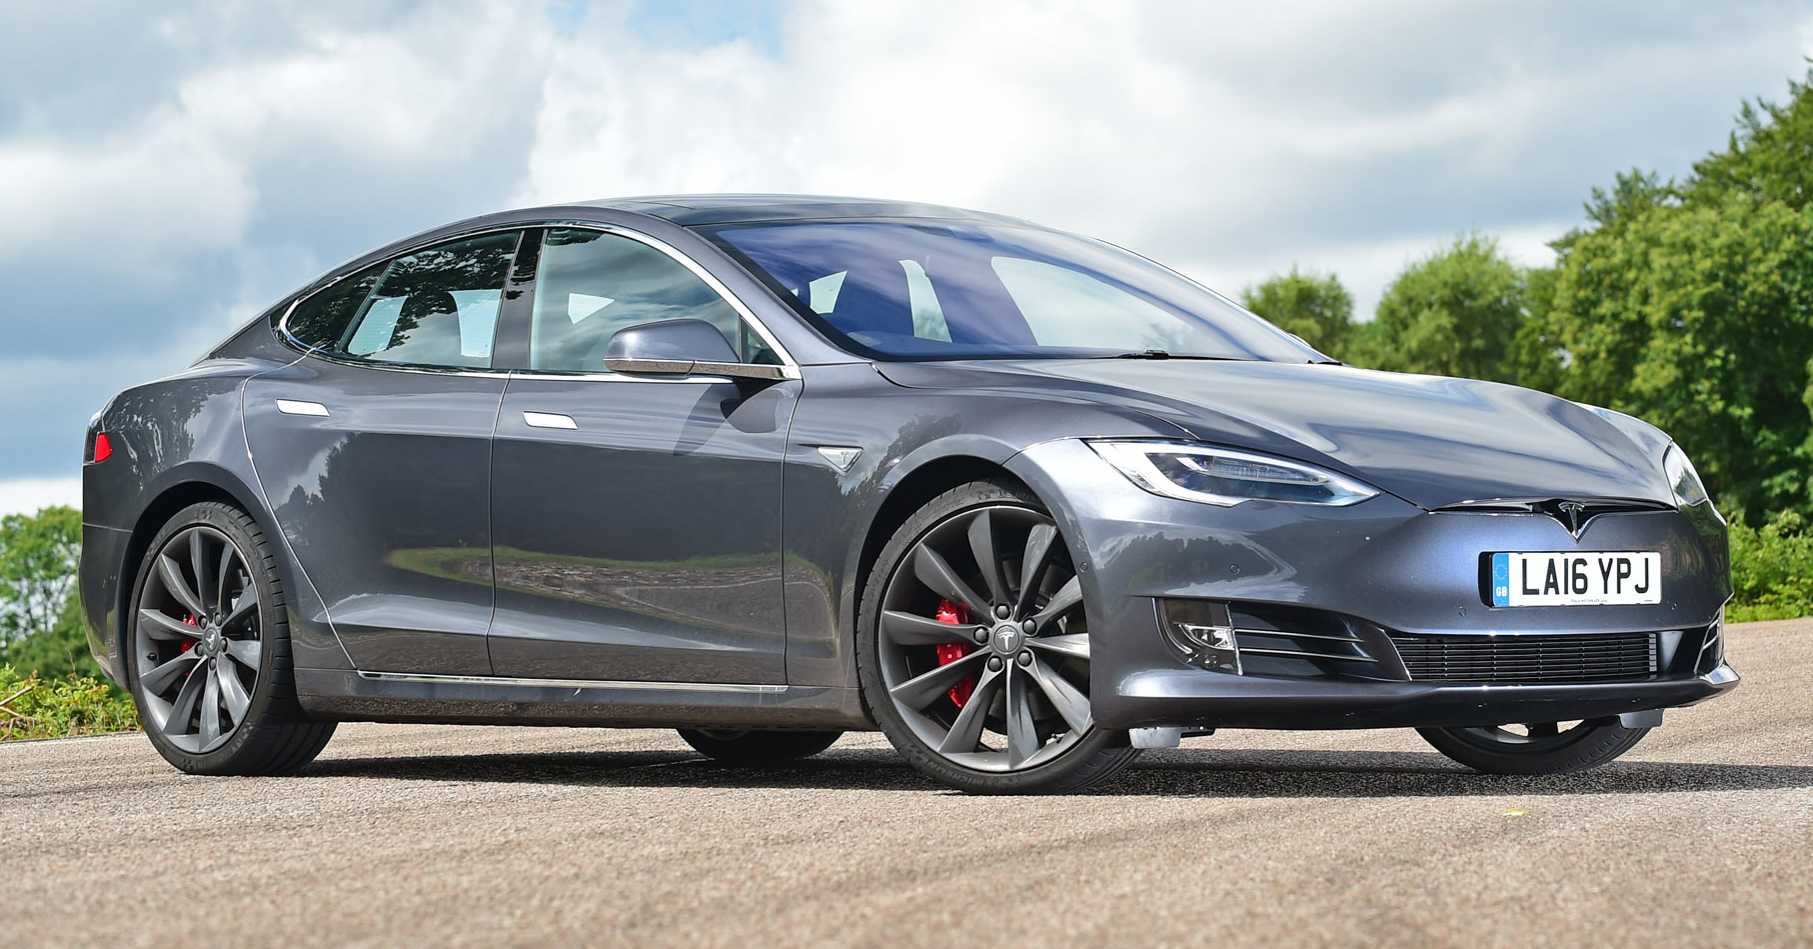 Hackers Can Steal a Tesla Model S in Seconds by Cloning Its Key